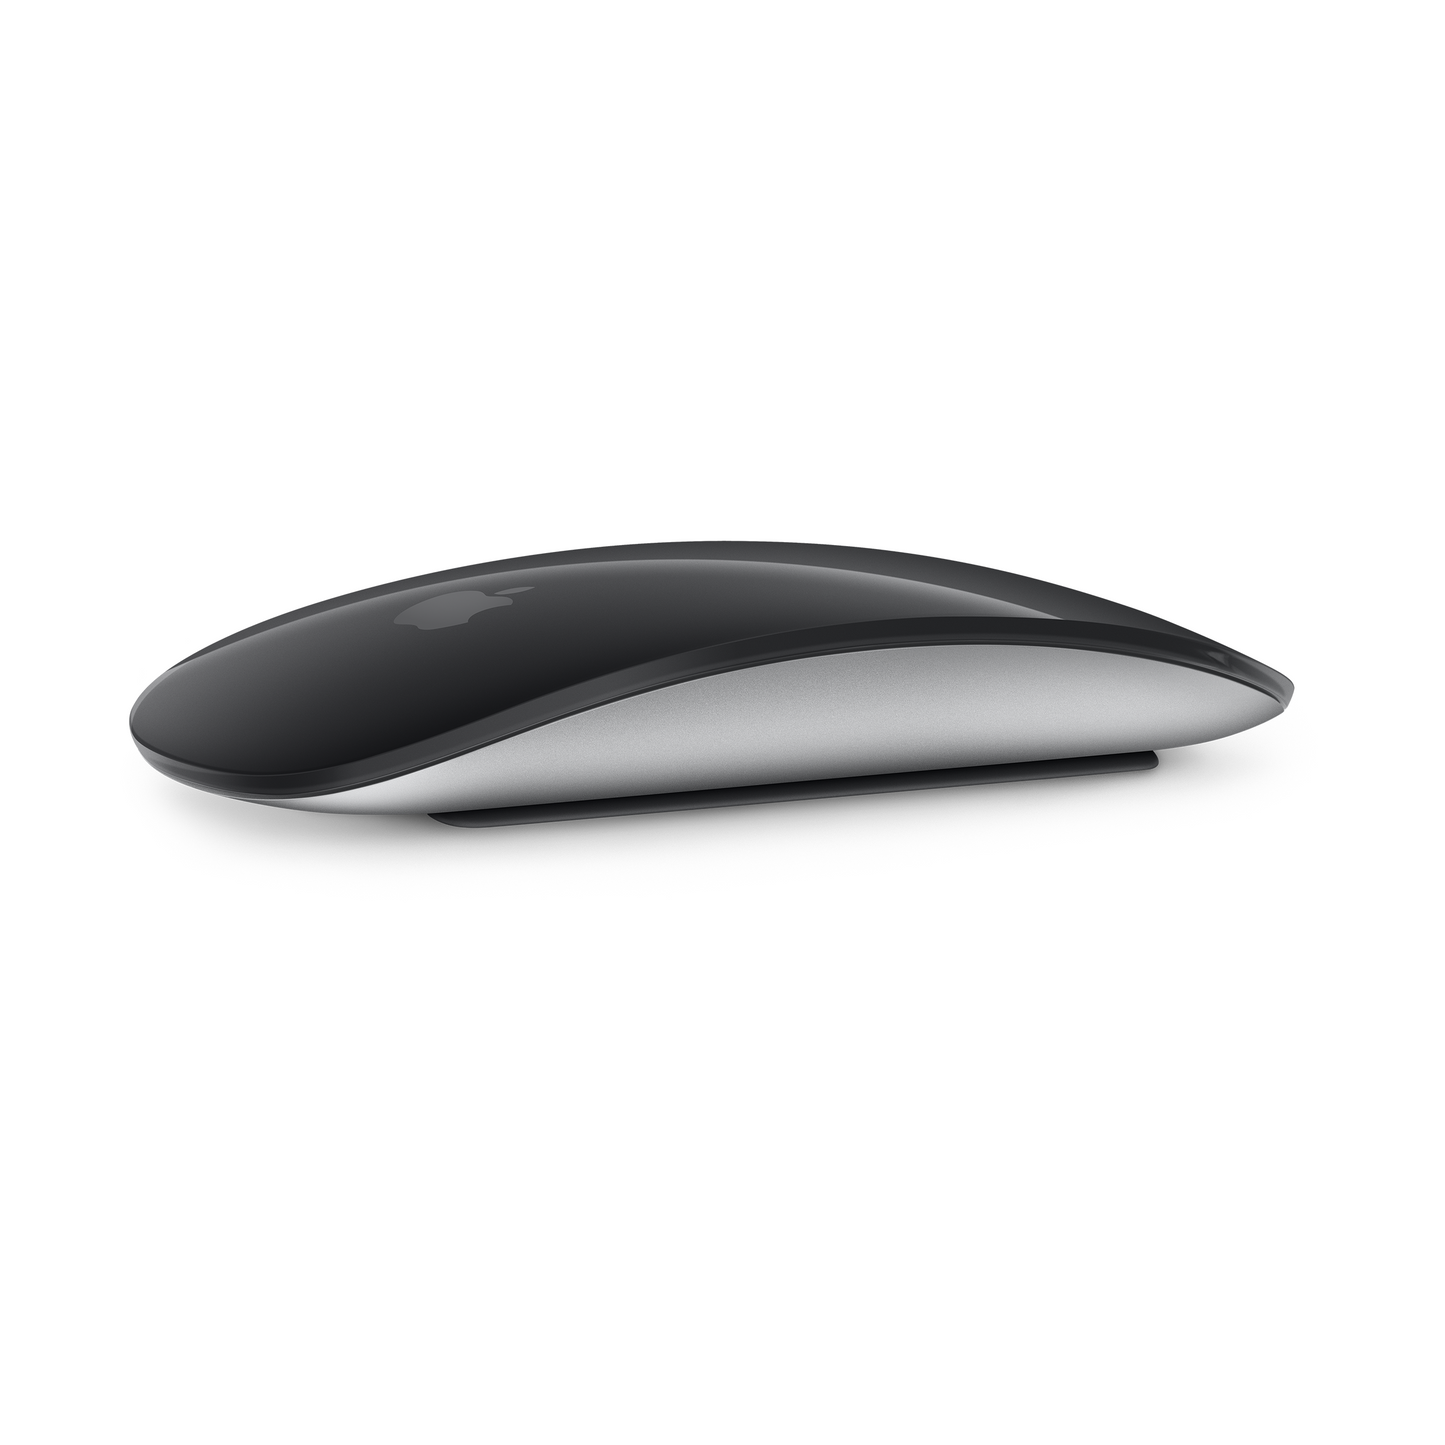 Magic Mouse - Black Multi-Touch Surface (2022)